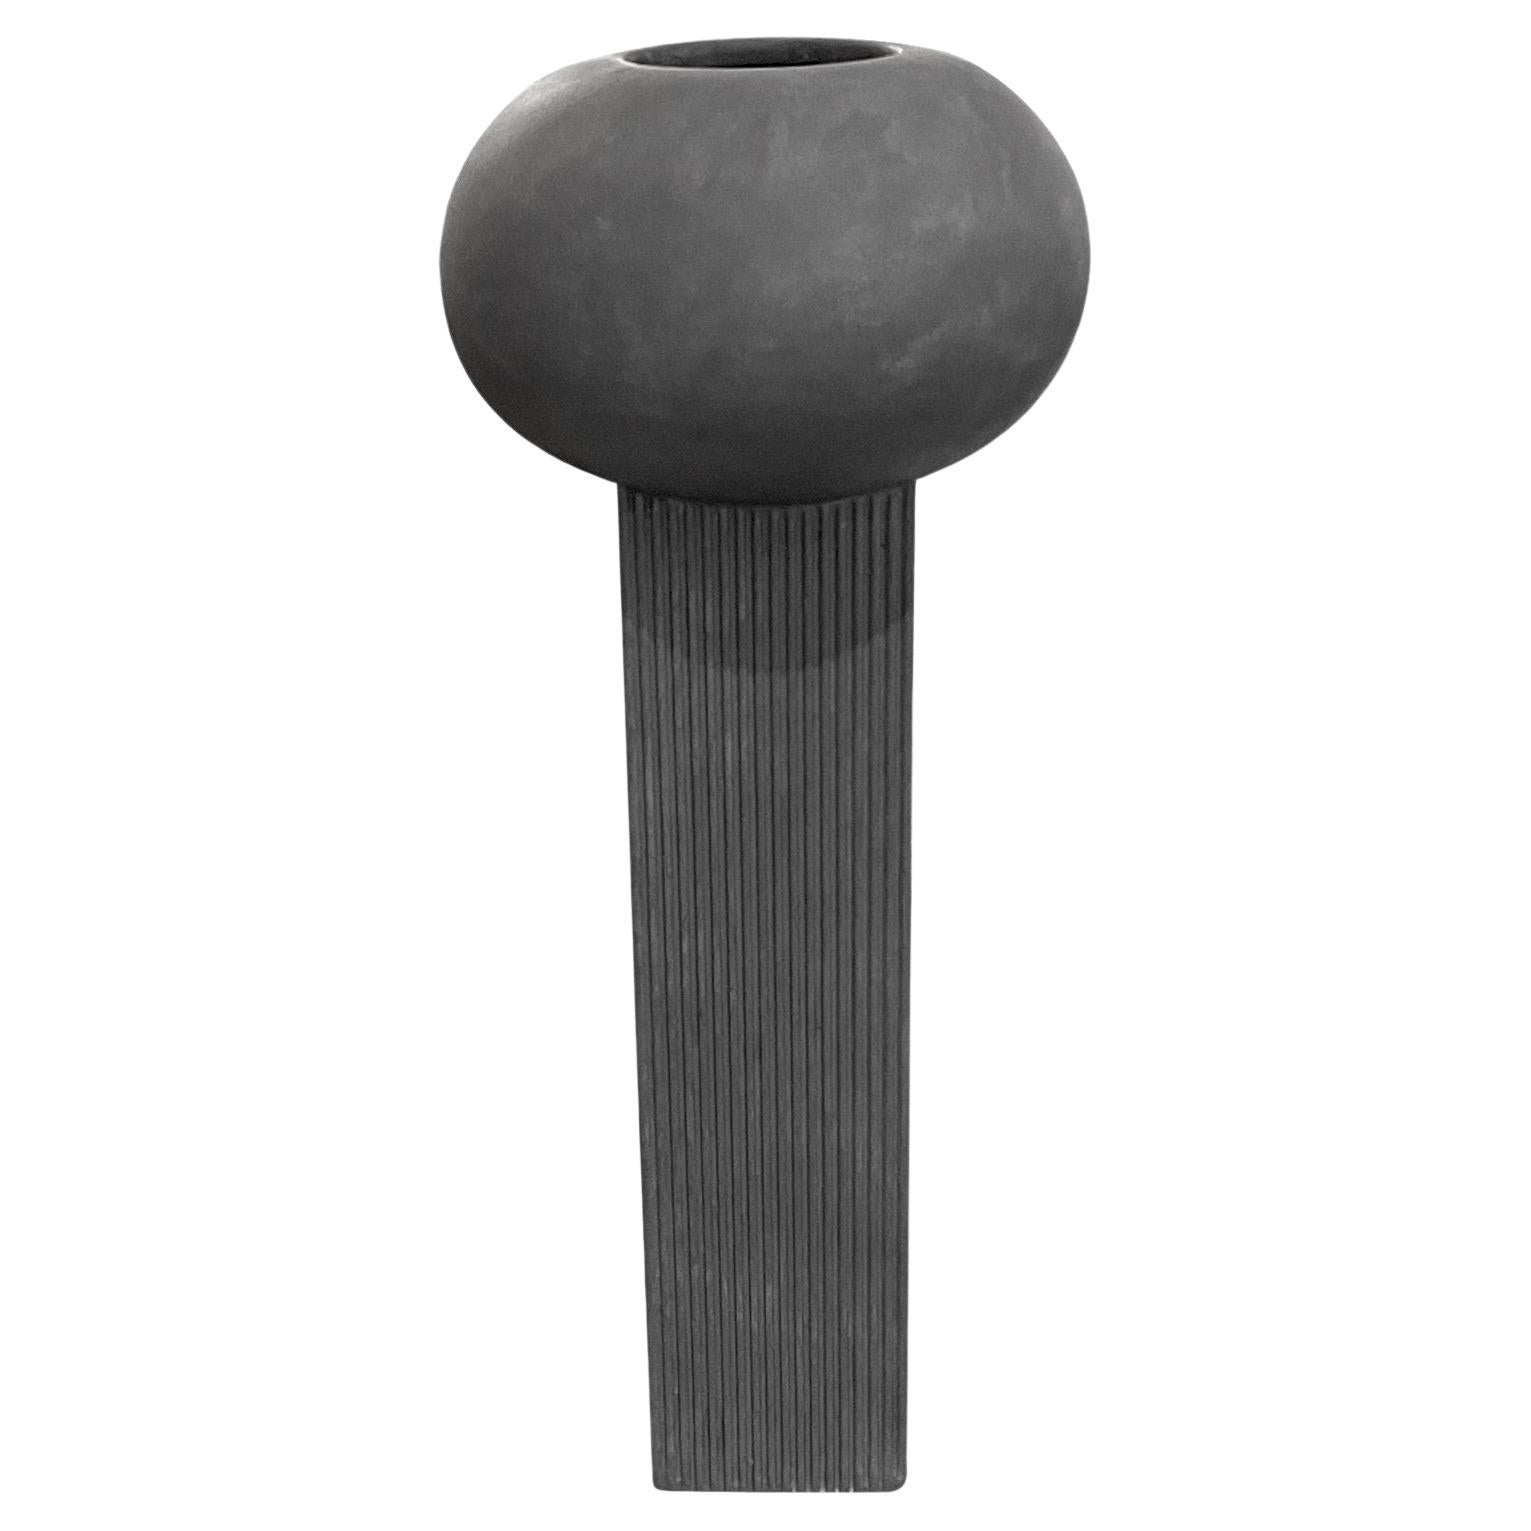 Grey Ribbed Column With Globe Top Large Danish Design Vase, Contemporary